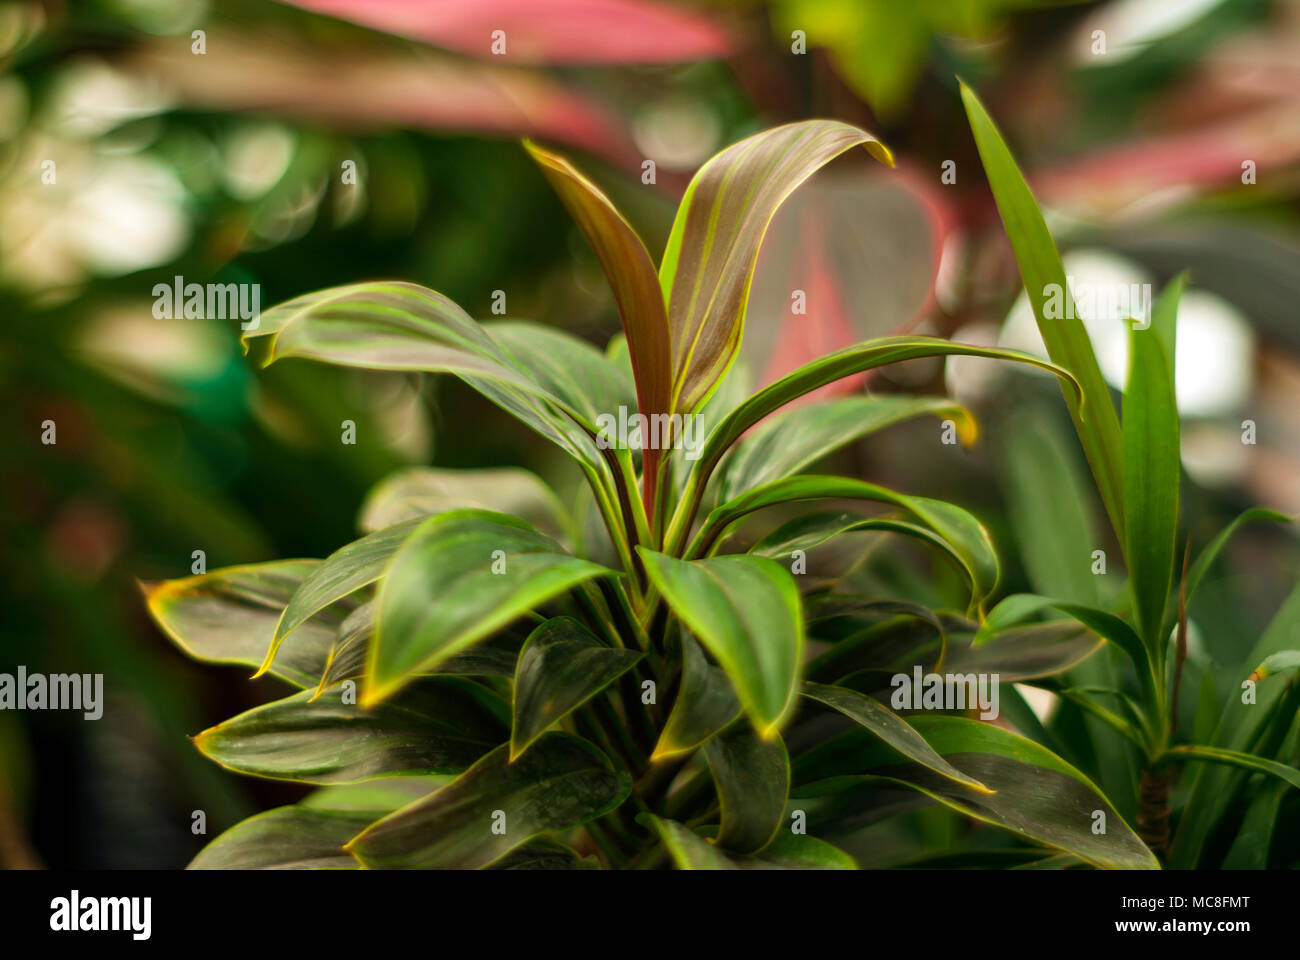 plant variety Cordyline terminalis with colored leaves on a blurred plant background Stock Photo